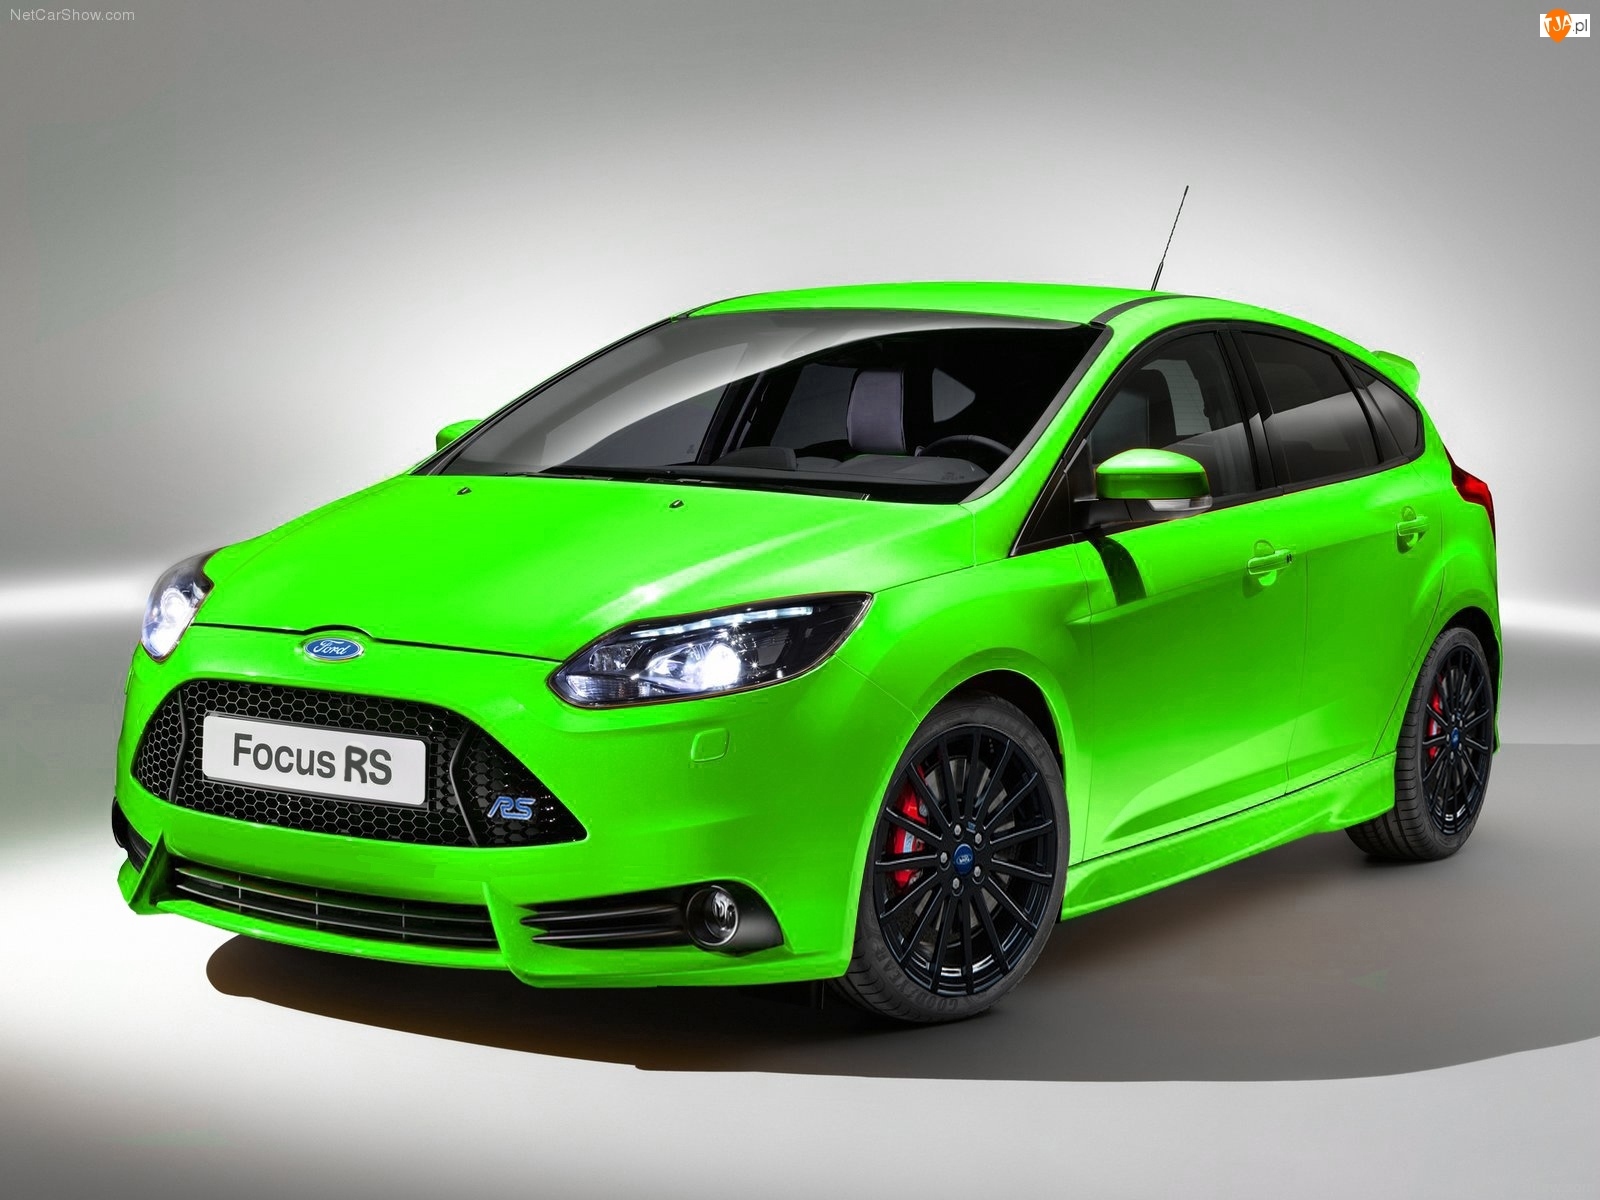 RS, Focus MK3, Ford